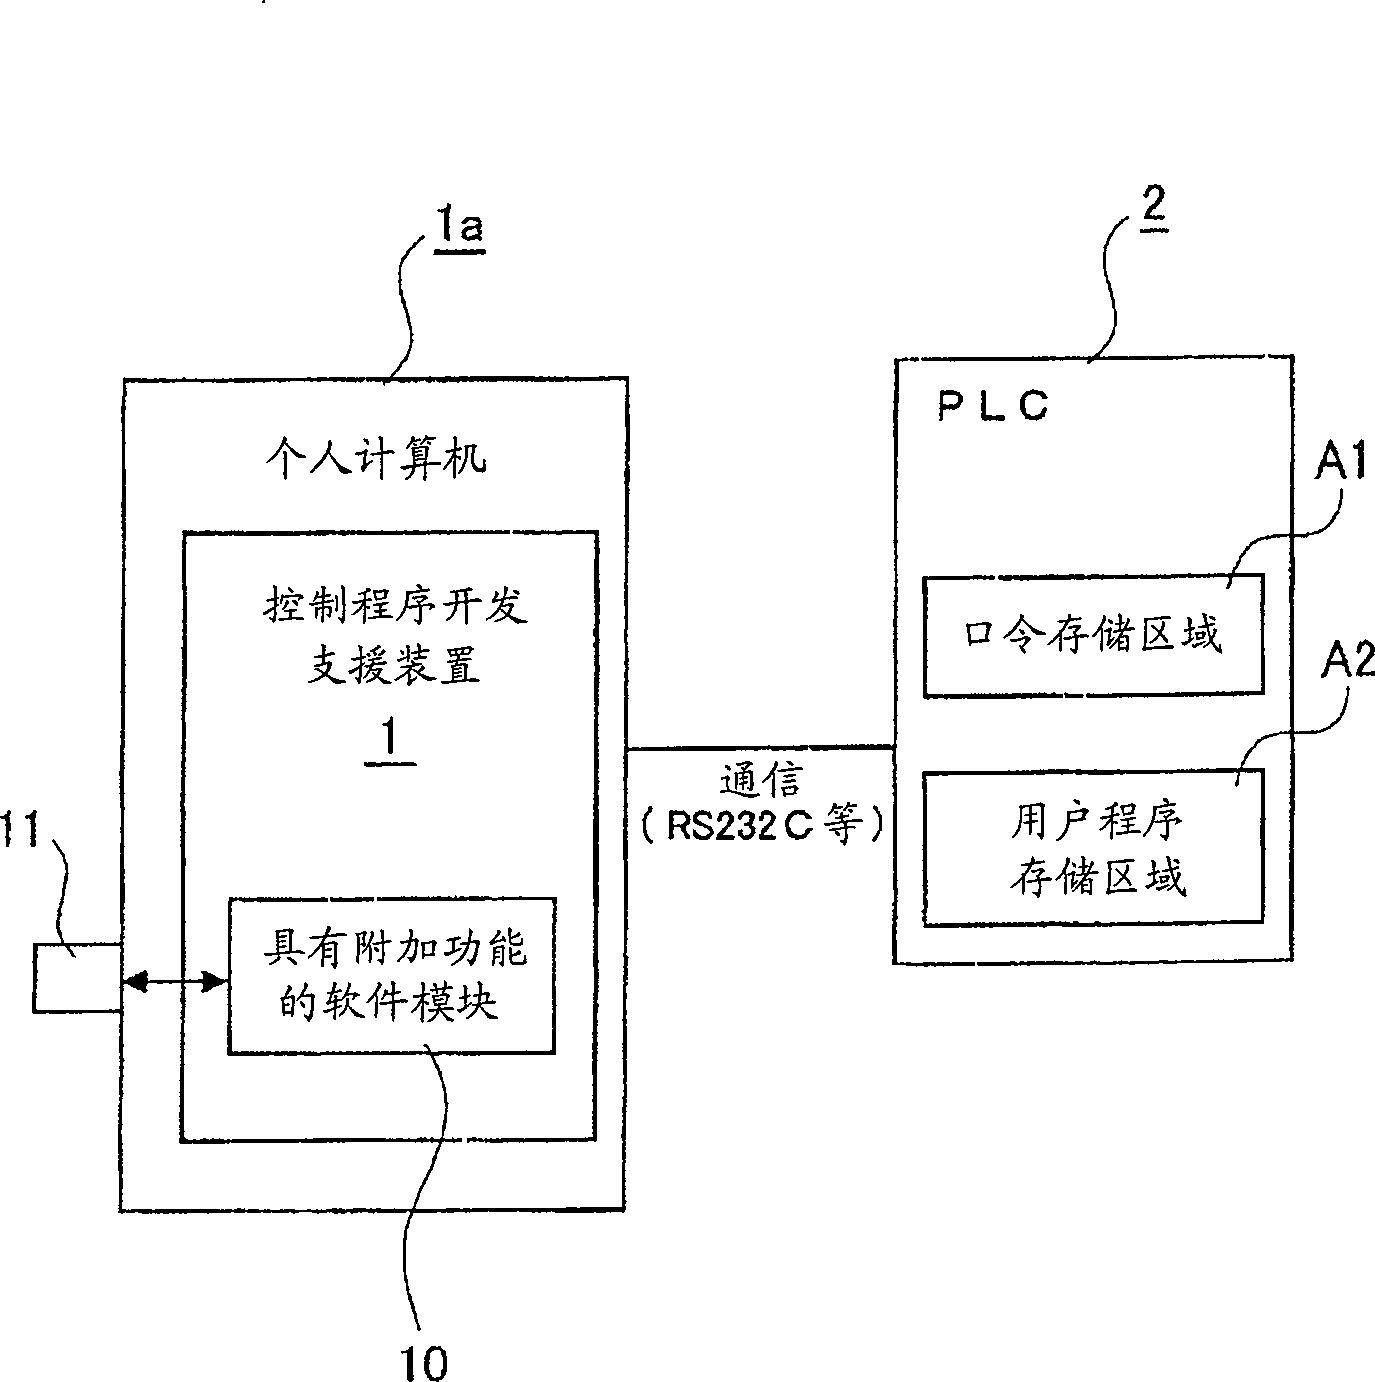 Programmable controller system